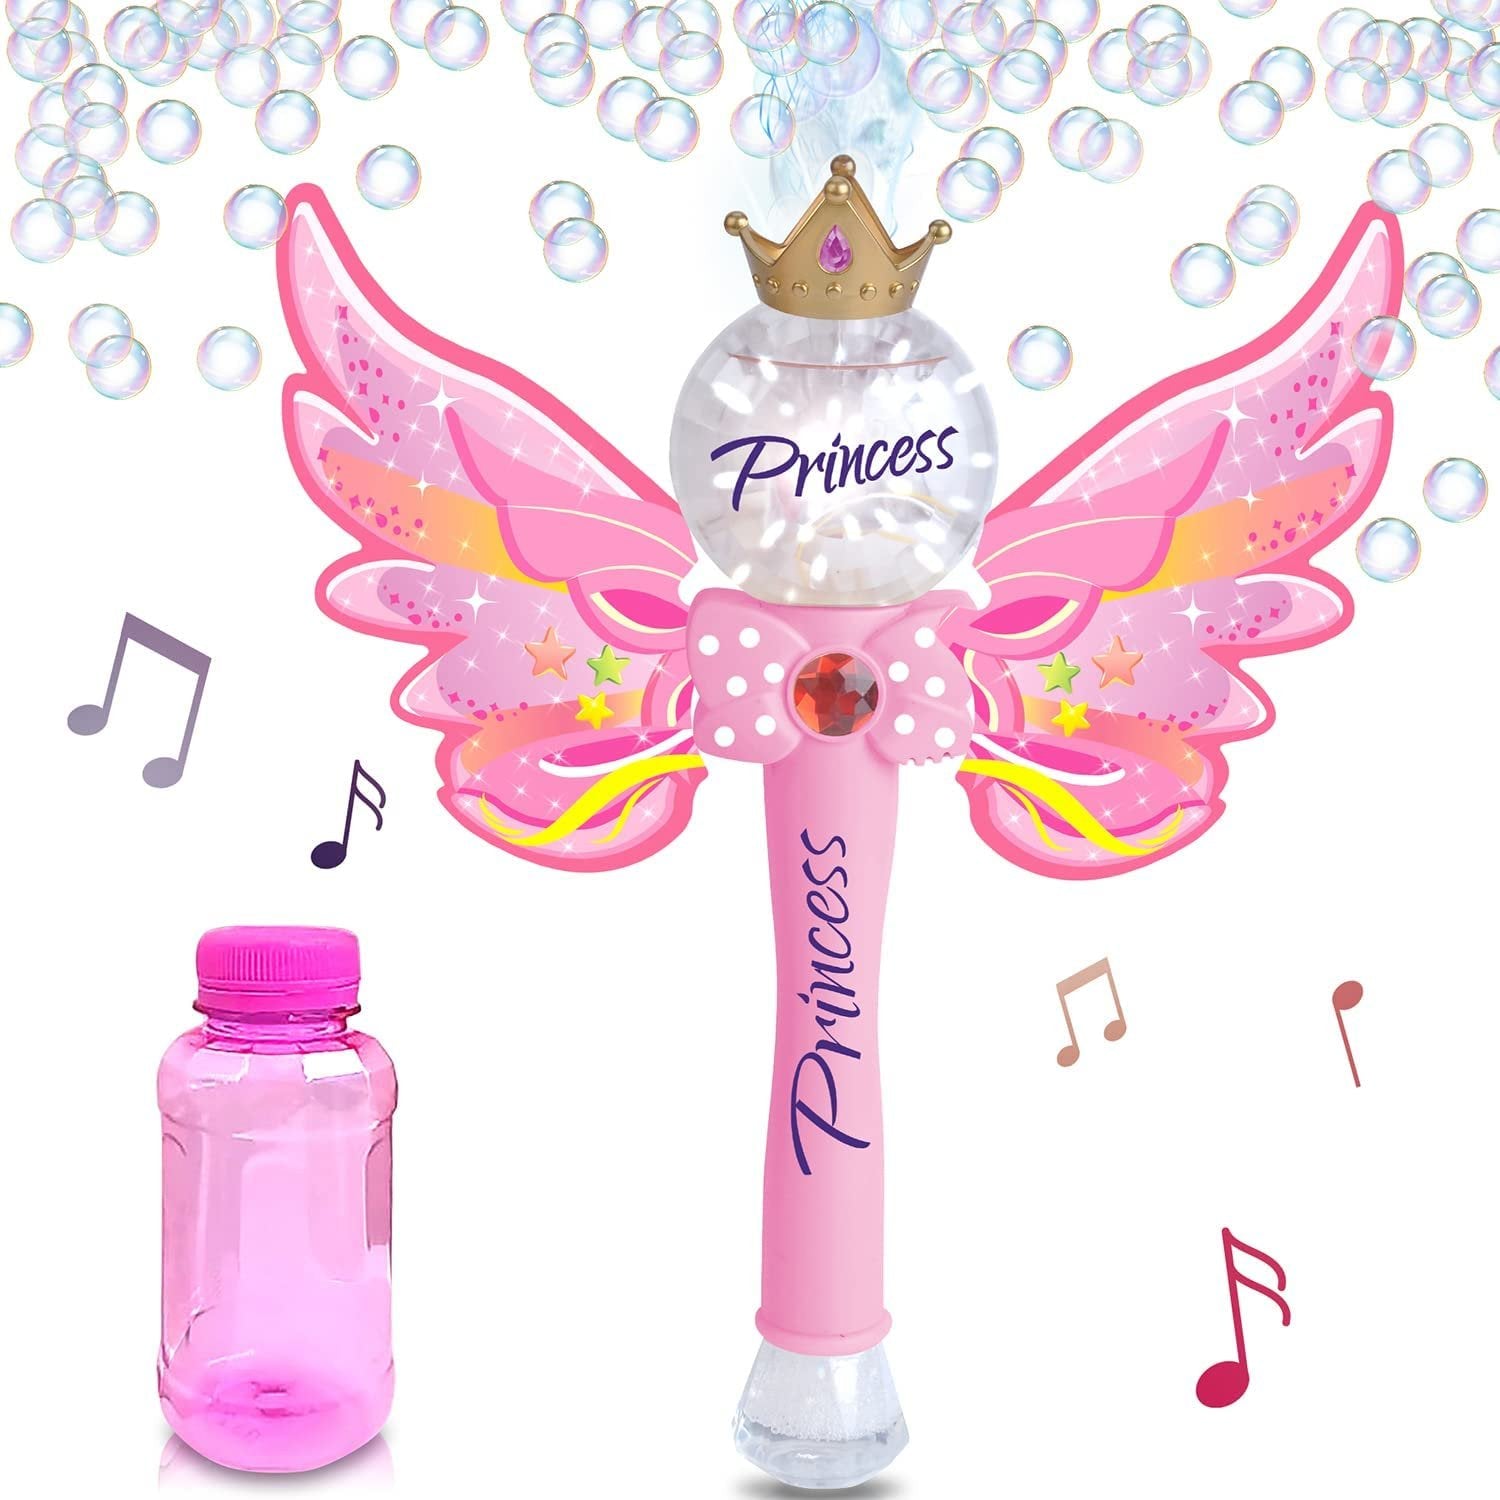 Light Up Magic Princess Bubble Blower Wand, 14" Illuminating Bubble Blower Wand with Thrilling LED & Sound Effect, Bubble Fluid Included, Great Gift Idea, Party Favor for Kids